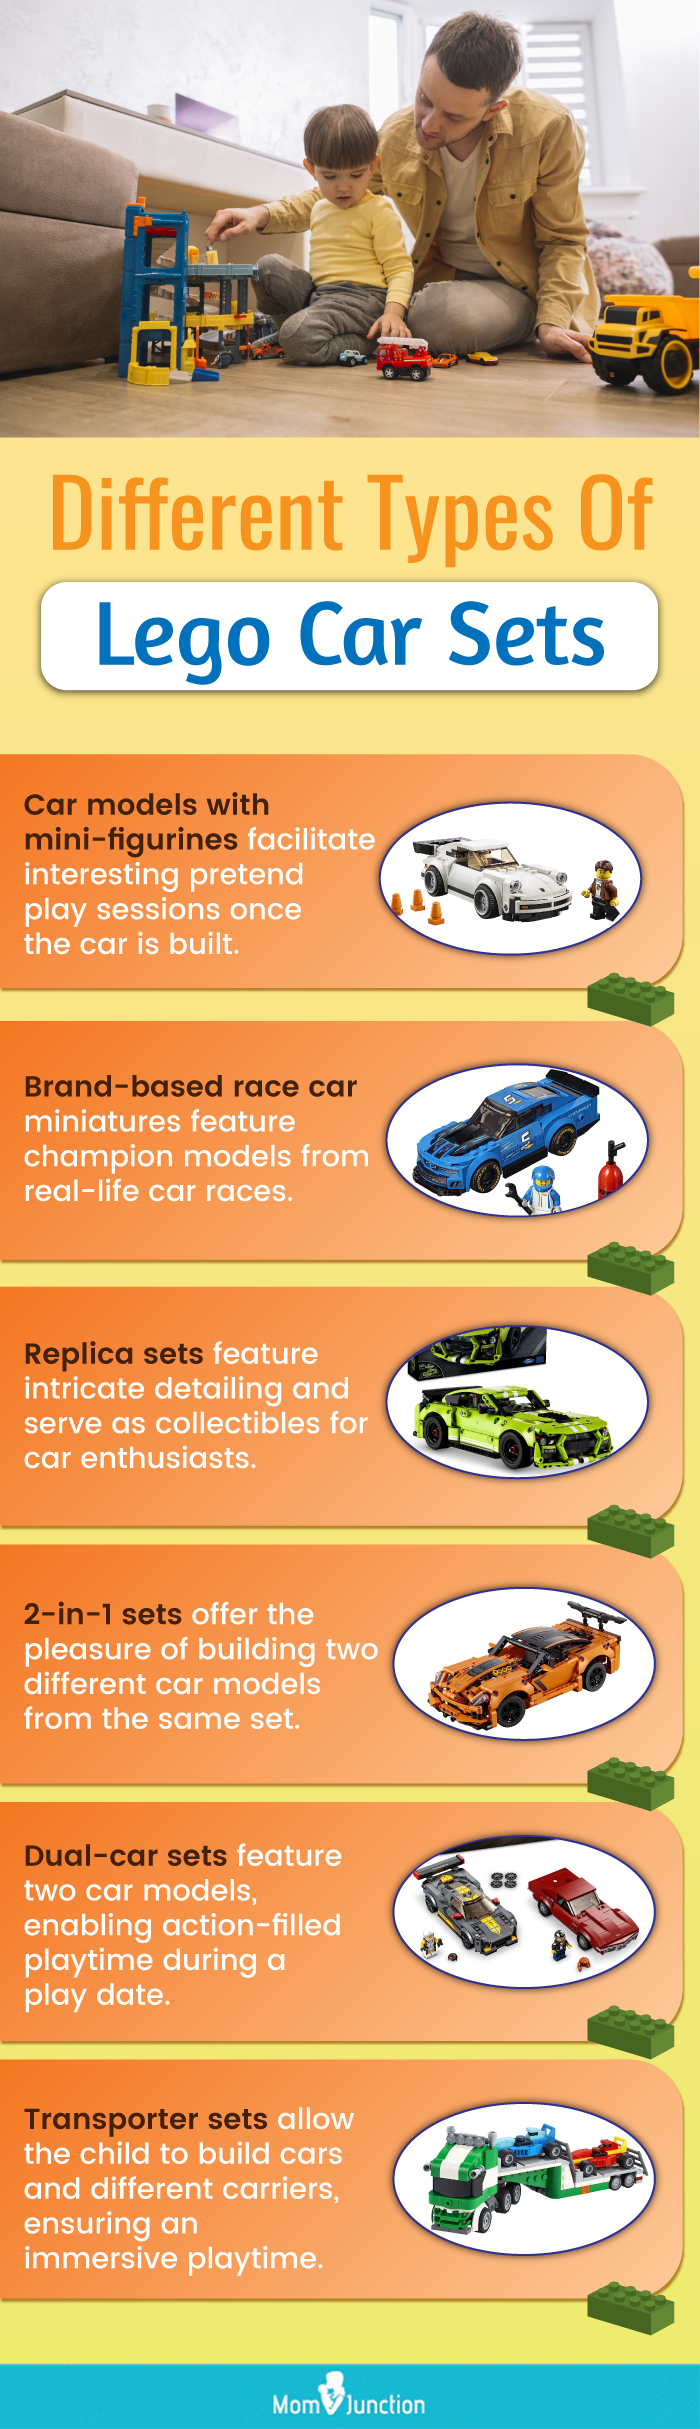 Different Types Of Lego Car Sets (infographic)